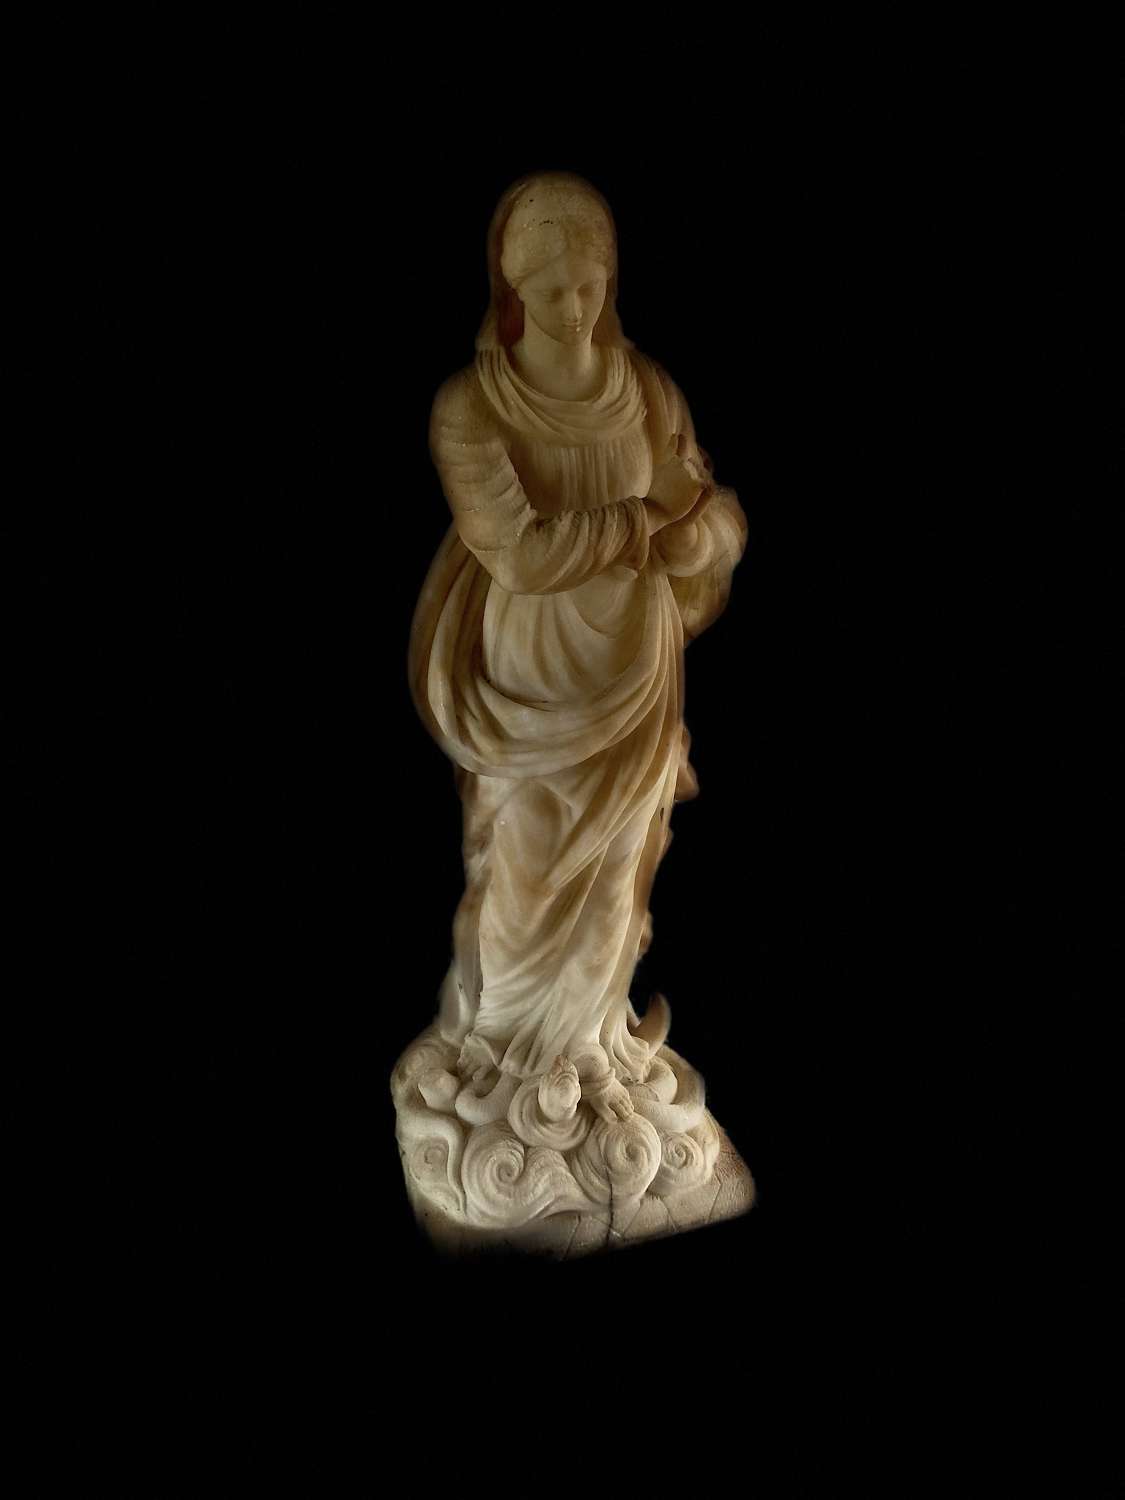 Early 19th century Alabaster figure of the virgin Mary